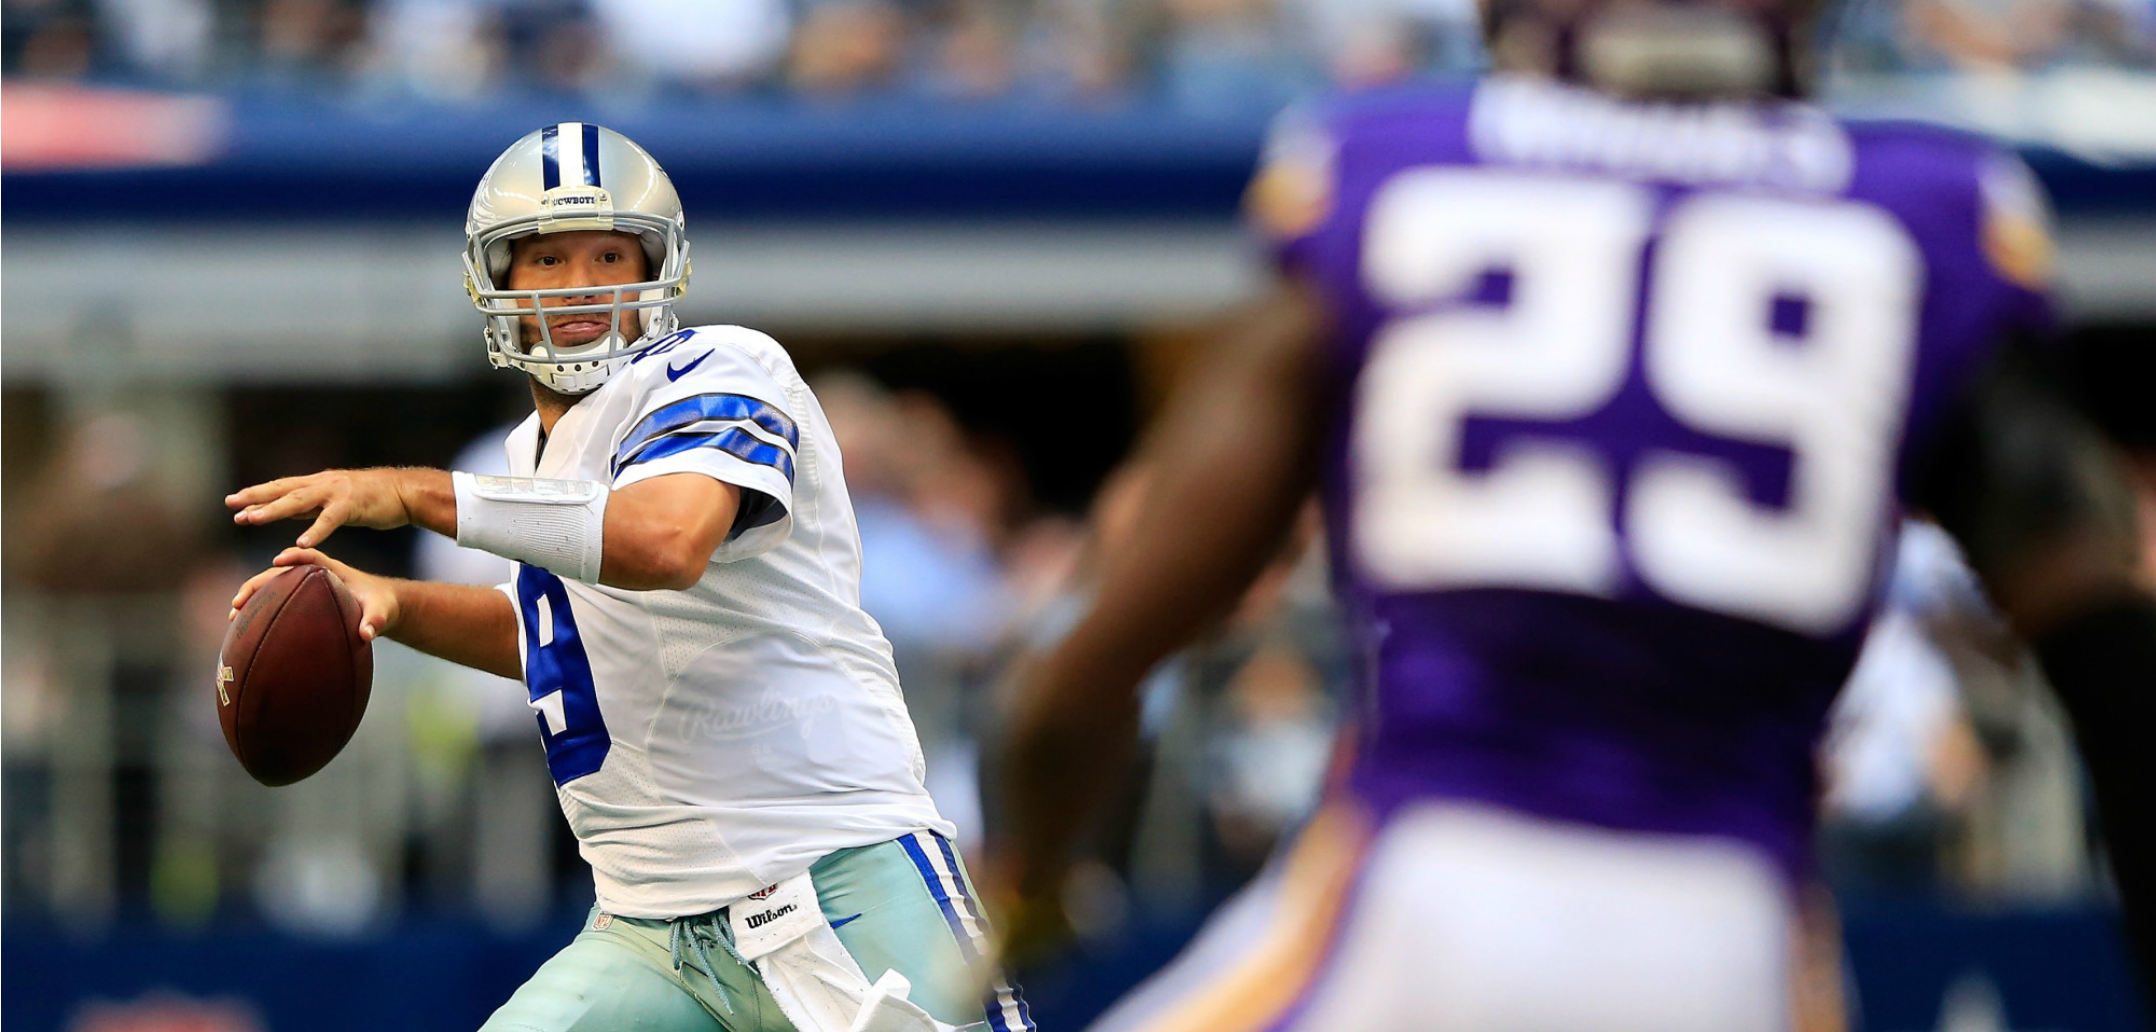 Courtesy of Huffington Post: As crazy as it sounds, Romo is one of the most valuable players in the NFL. 